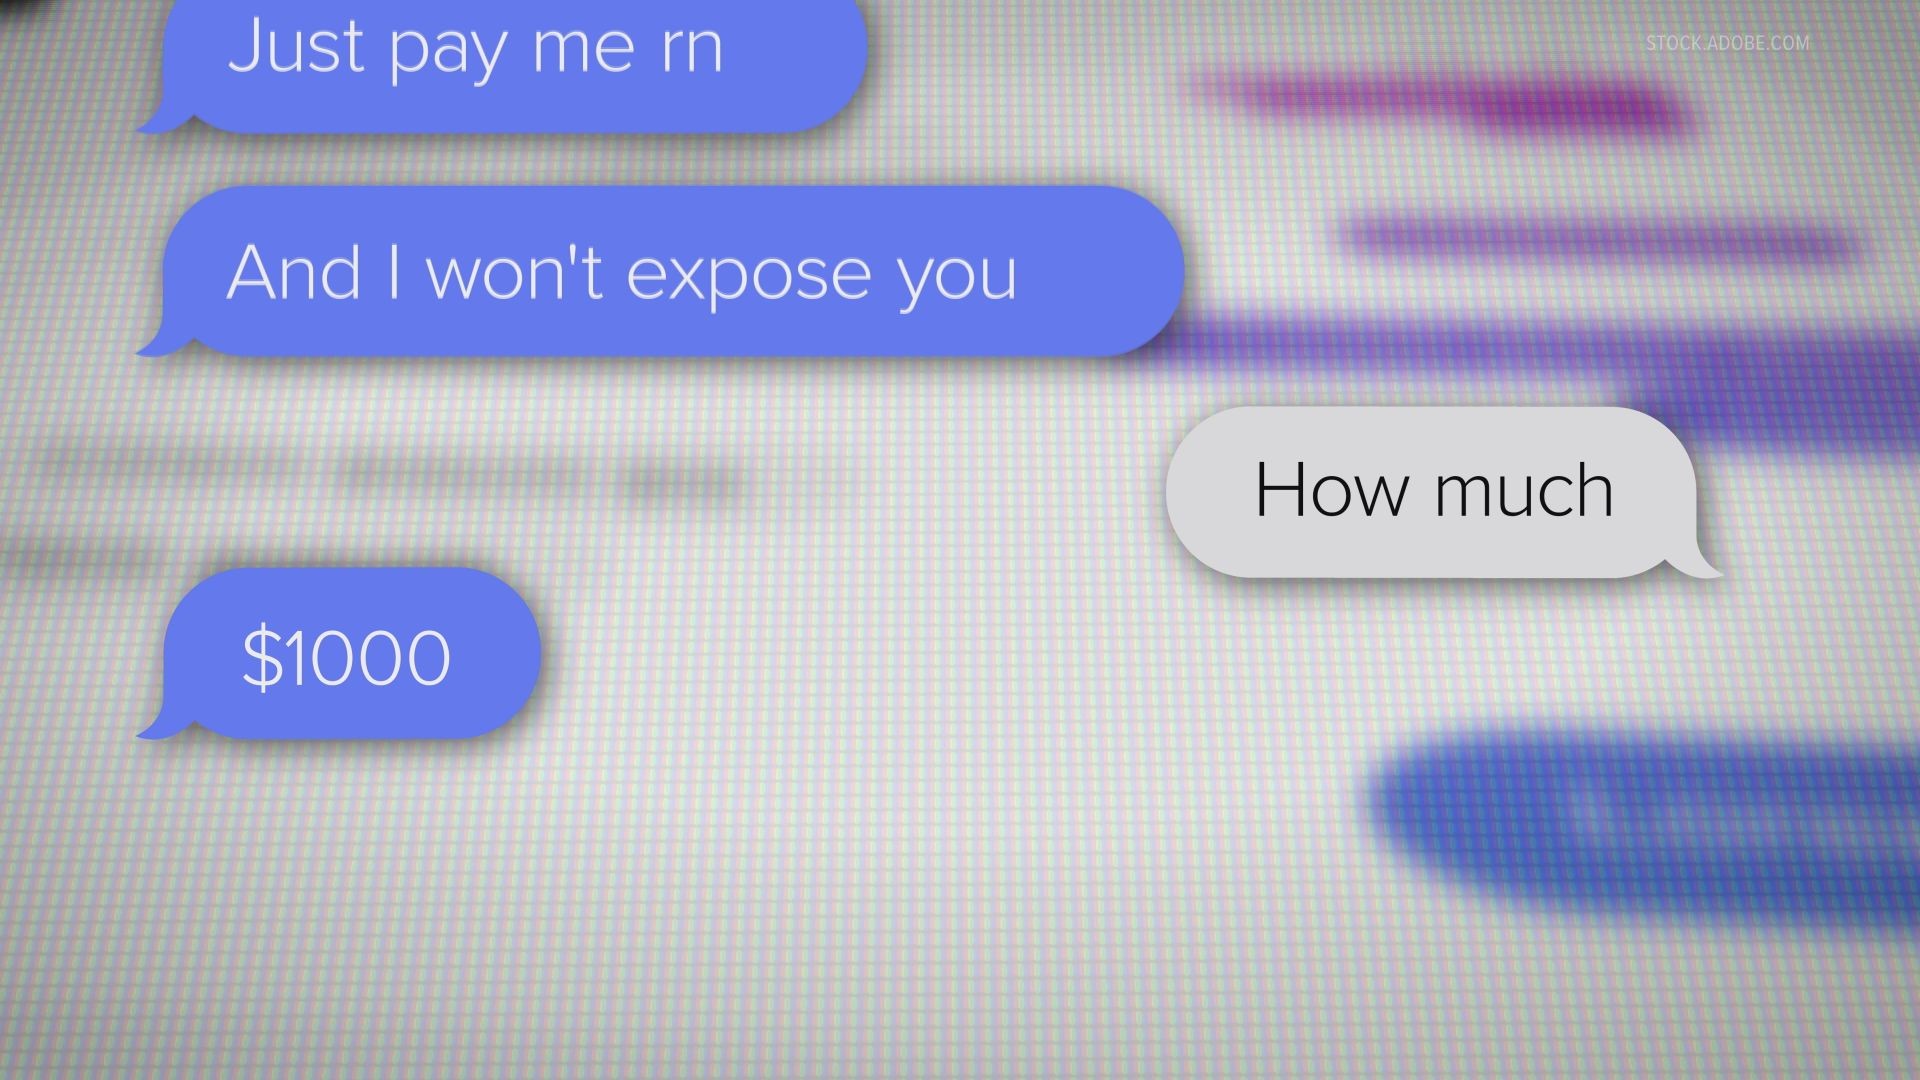 Sextortion has been an issue for more than a decade, but 13 Investigates learned the crime is changing.